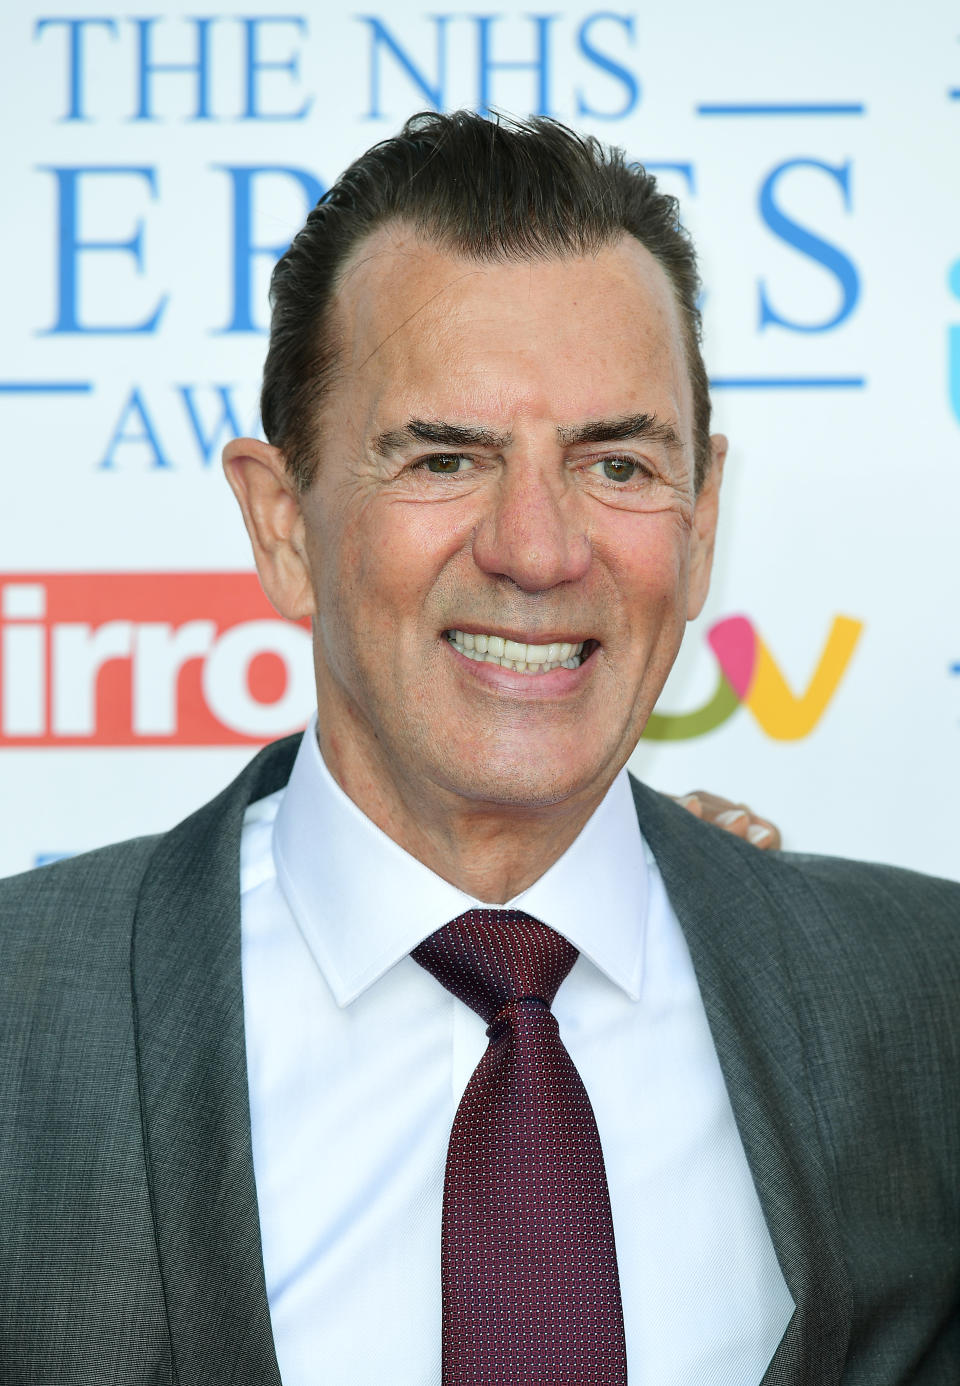 Duncan Bannatyne attending the NHS Heroes Awards at the London Hilton on Park Lane.